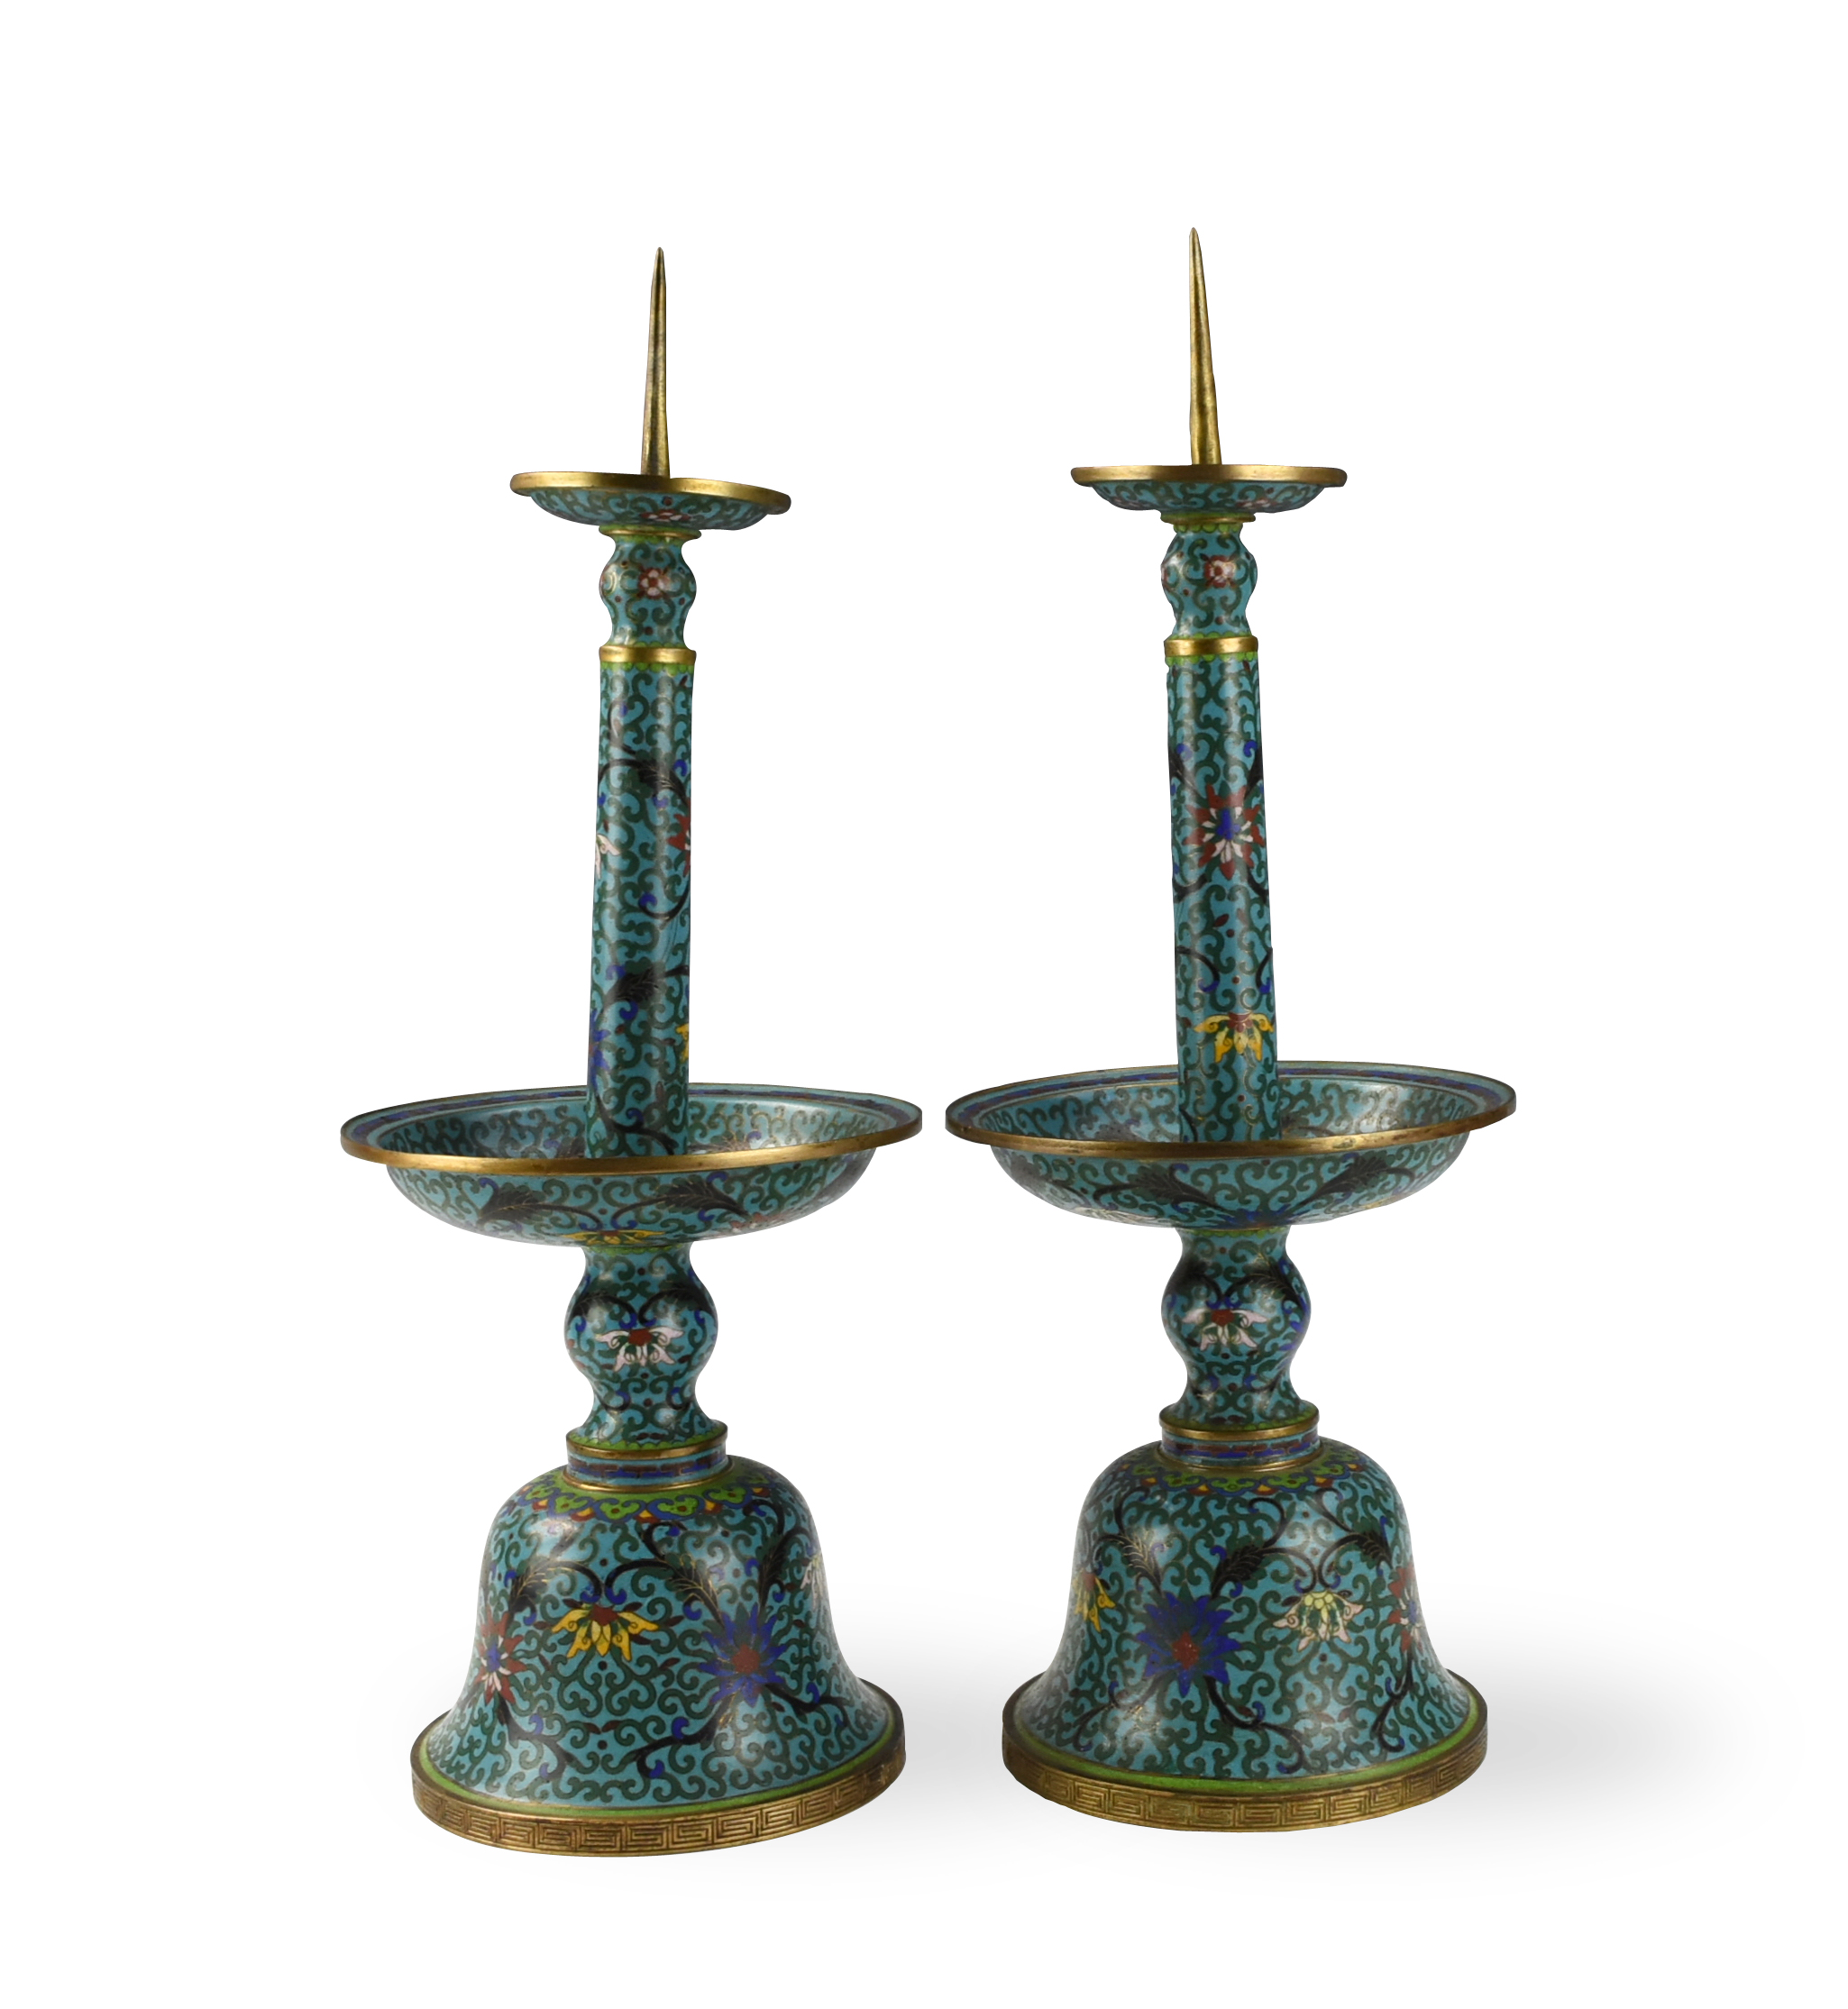 PAIR OF CHINESE CLOISONNE CANDLE